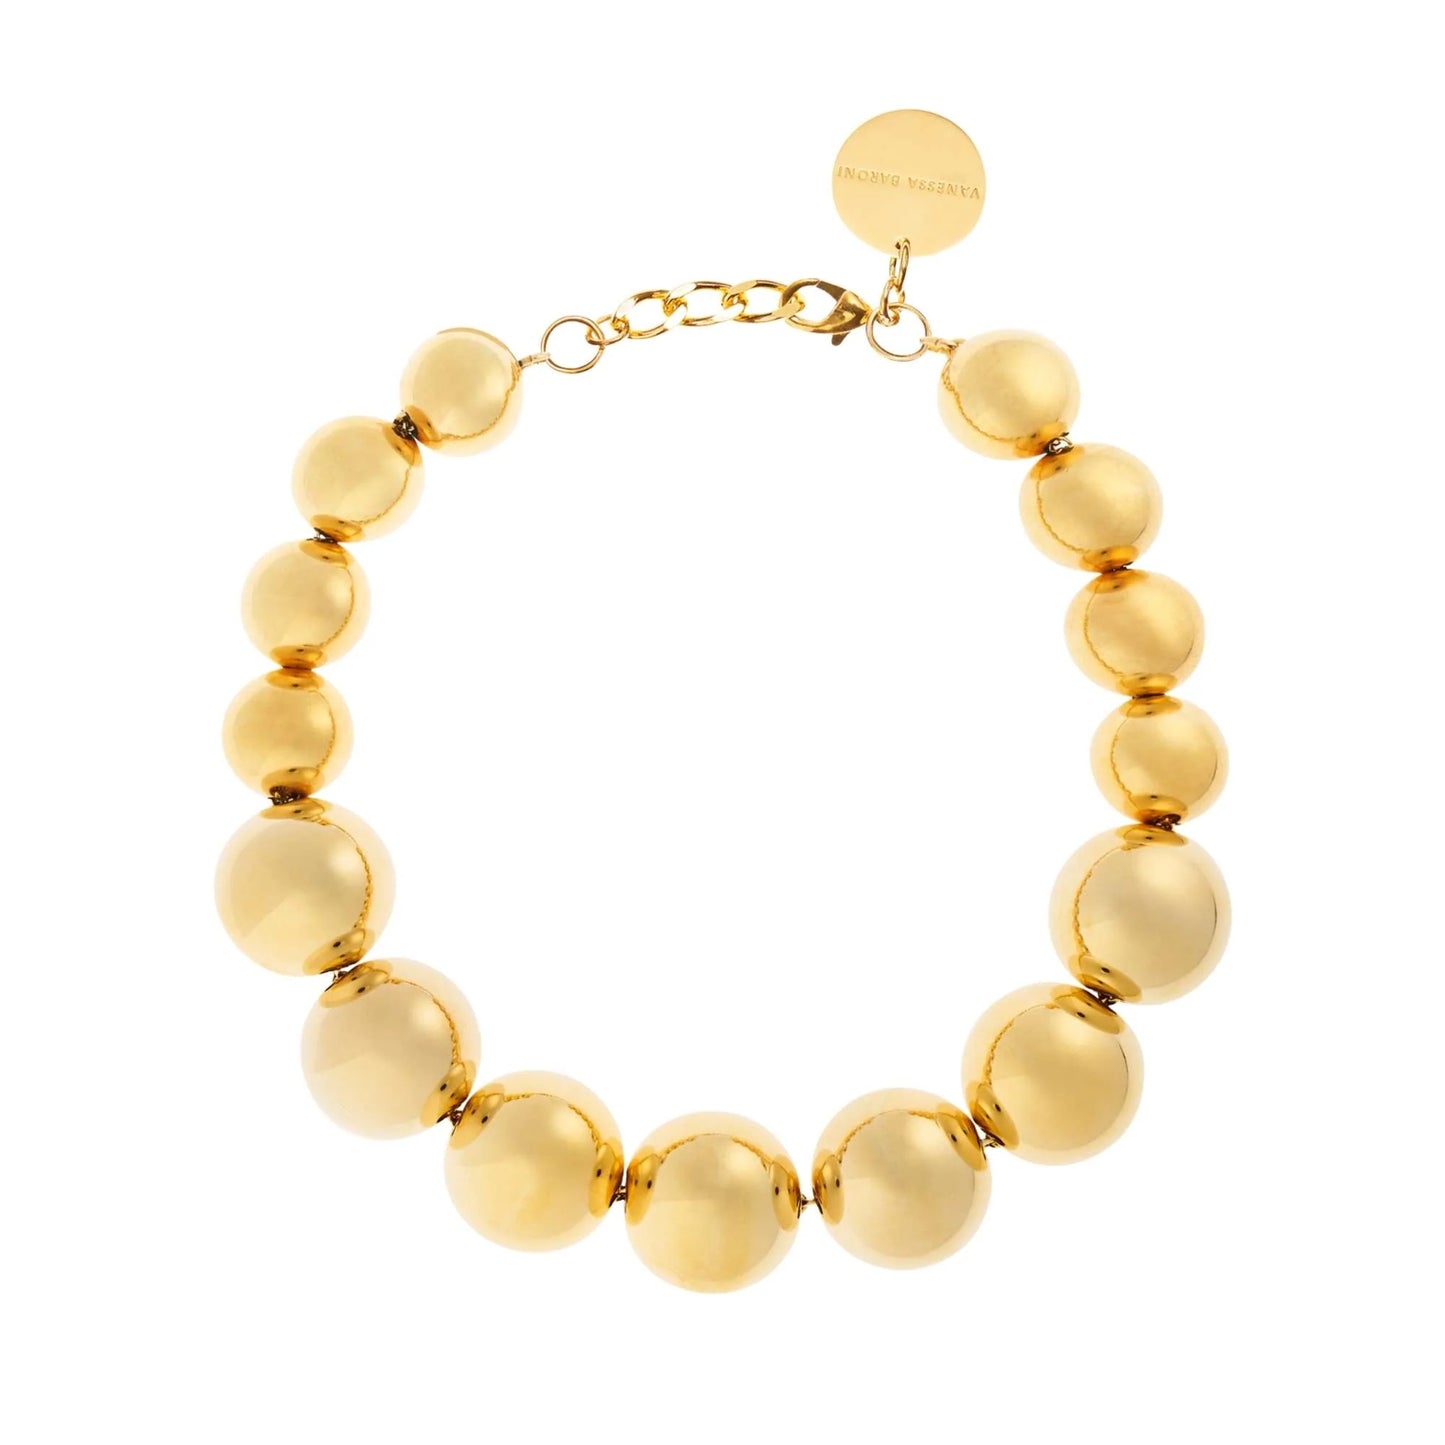 Beads Necklace - Gold by Vanessa Baroni